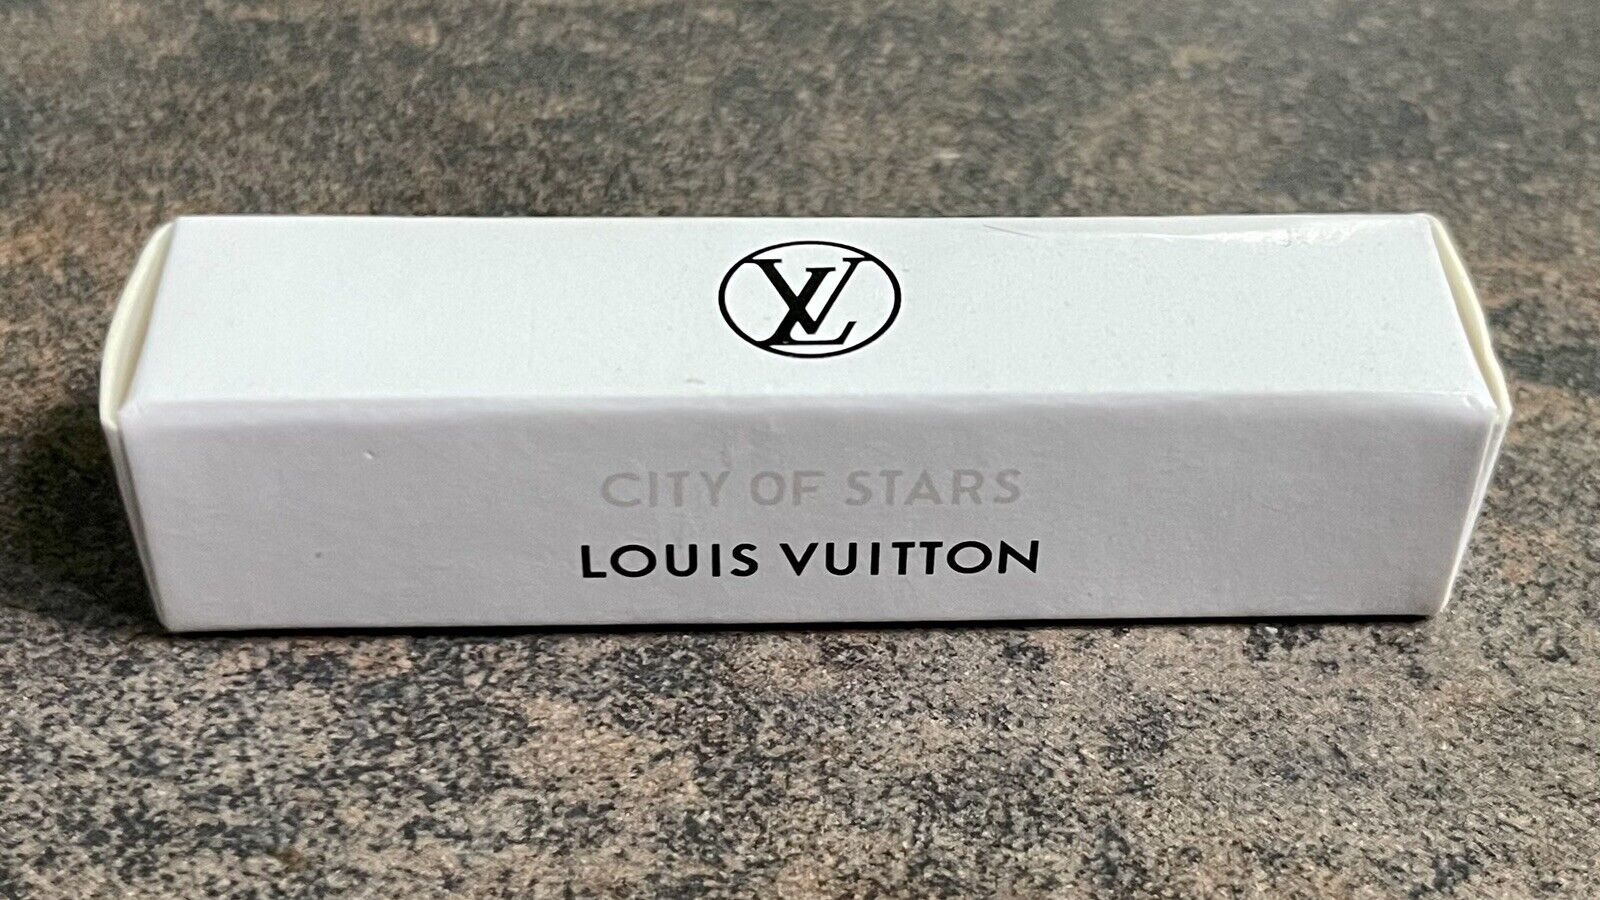 City of Stars by Louis Vuitton - Samples